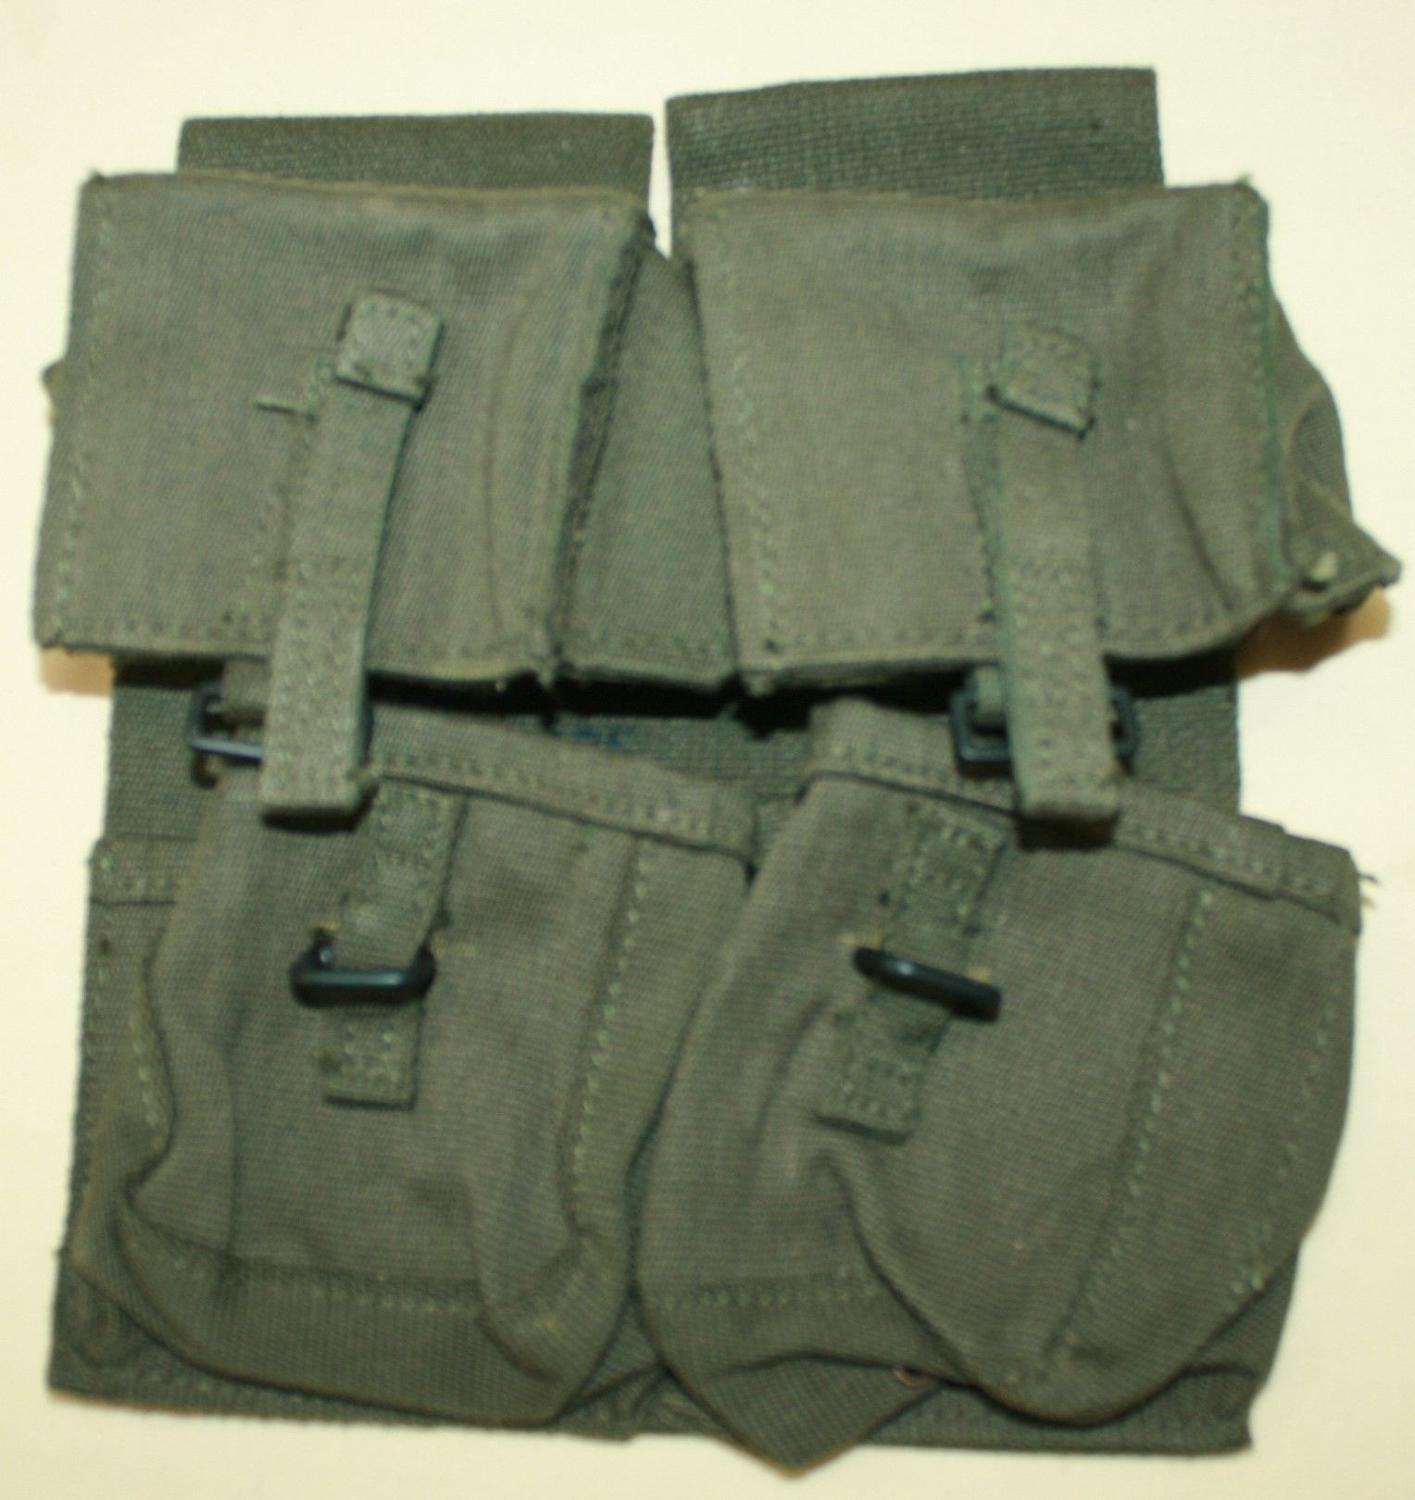 A PAIR OF ARMERLIGHT MAGAZINE AMMO POUCHES